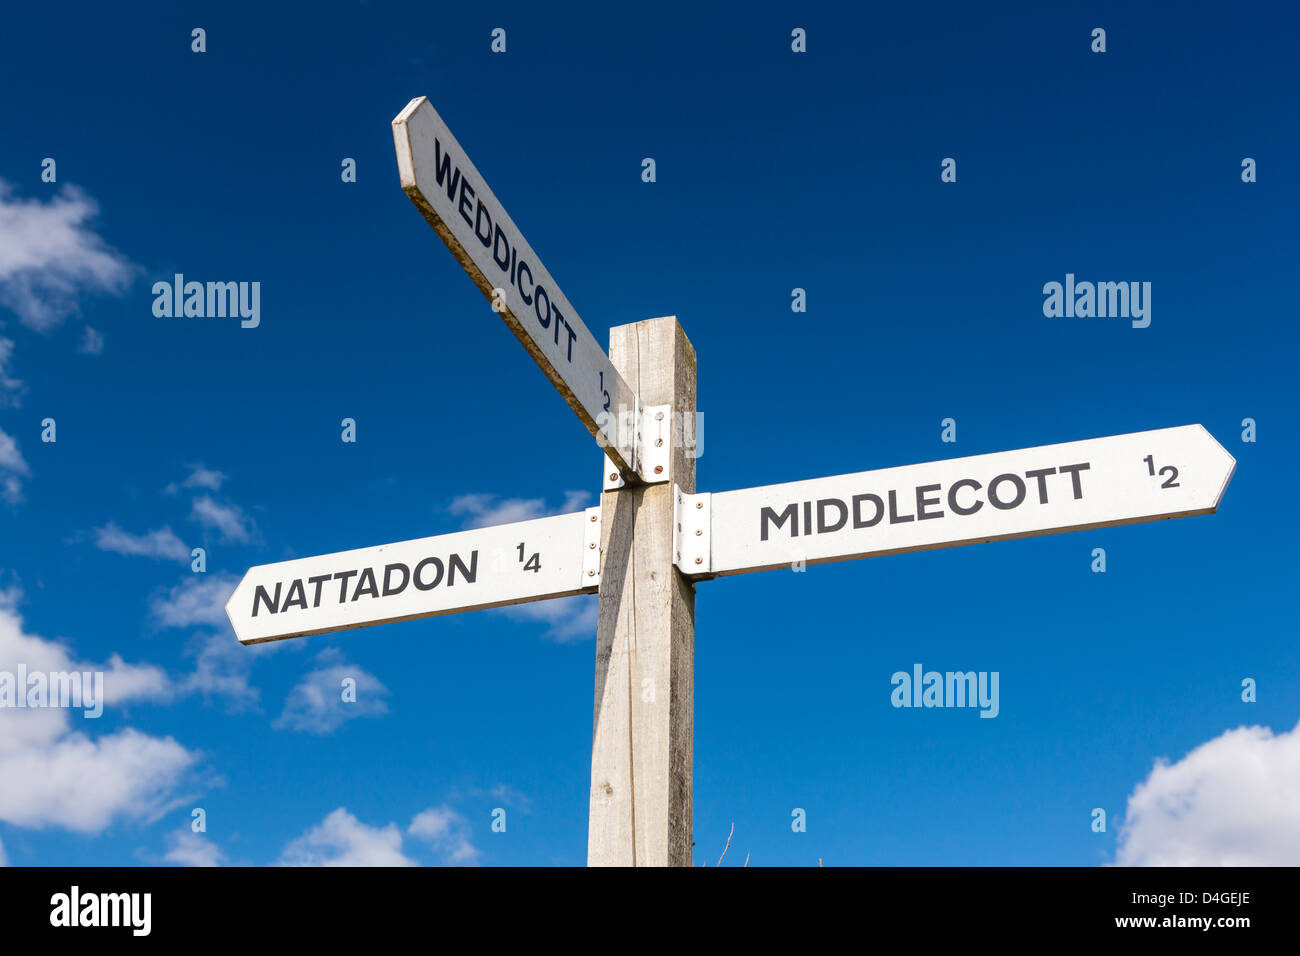 Signpost with destinations in Dartmoor National Park, Chagford, Devon, England, UK, Europe. Stock Photo